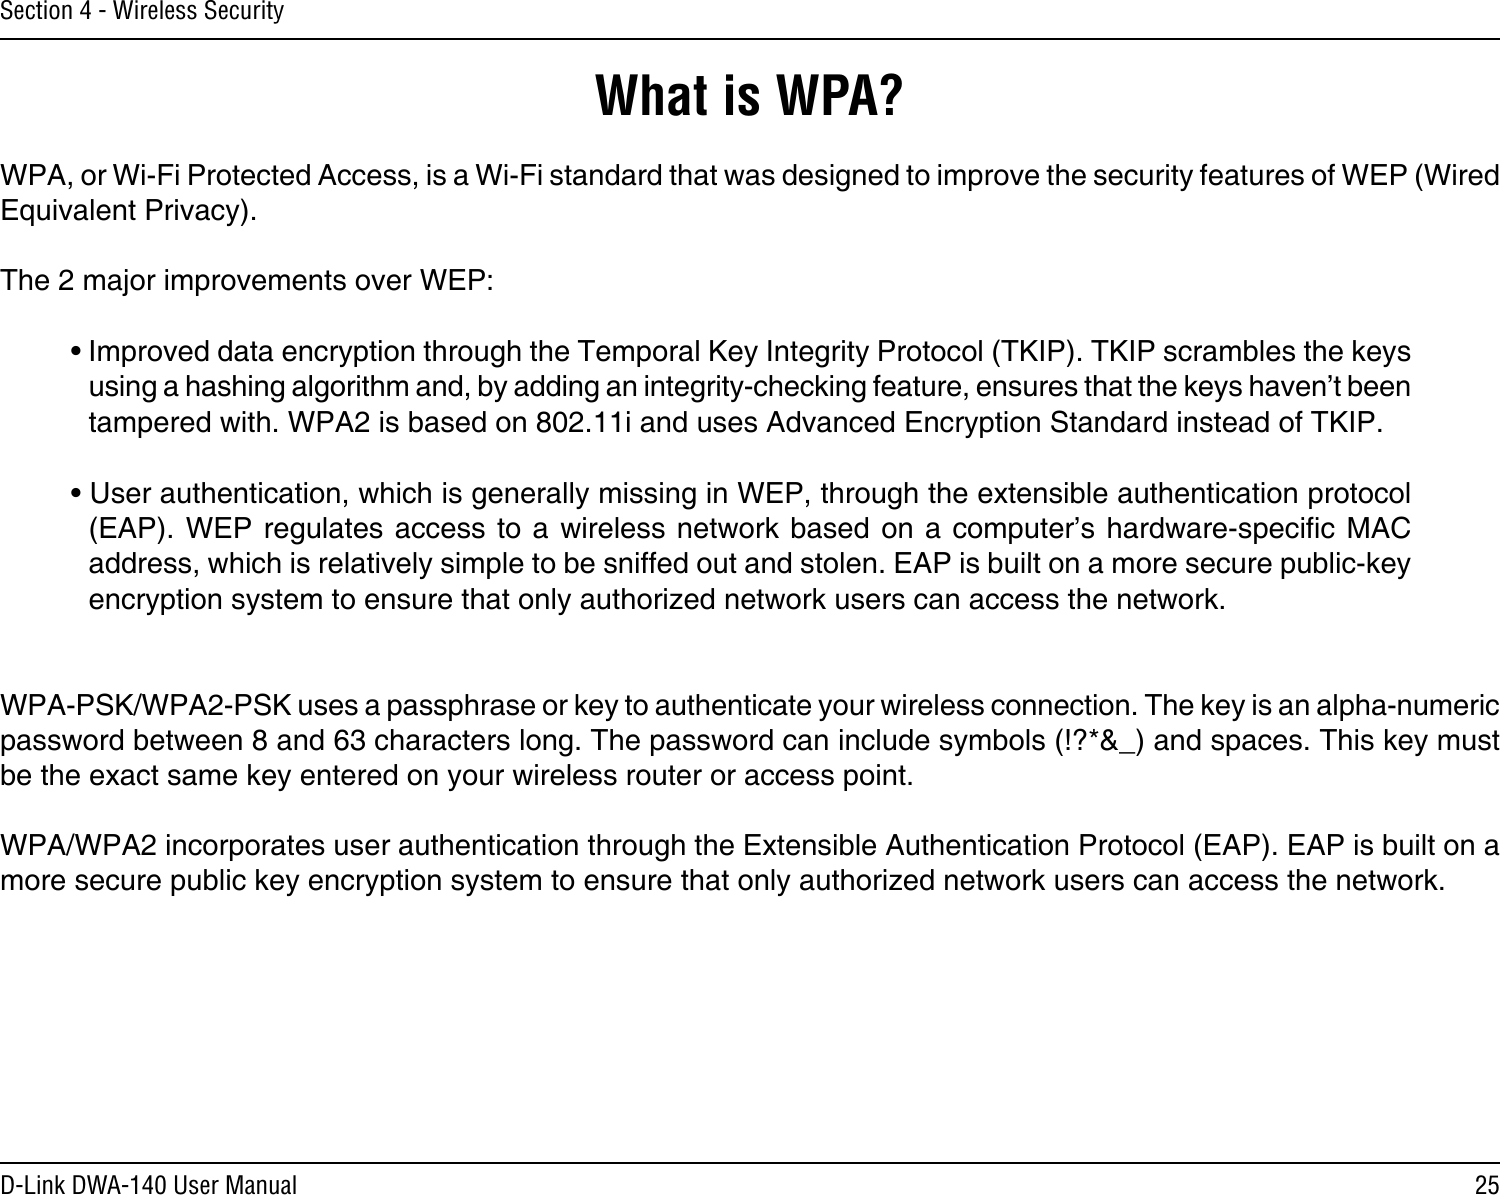 25D-Link DWA-140 User ManualSection 4 - Wireless SecurityWhat is WPA?WPA, or Wi-Fi Protected Access, is a Wi-Fi standard that was designed to improve the security features of WEP (Wired Equivalent Privacy).  The 2 major improvements over WEP: • Improved data encryption through the Temporal Key Integrity Protocol (TKIP). TKIP scrambles the keys using a hashing algorithm and, by adding an integrity-checking feature, ensures that the keys haven’t been tampered with. WPA2 is based on 802.11i and uses Advanced Encryption Standard instead of TKIP.• User authentication, which is generally missing in WEP, through the extensible authentication protocol (EAP). WEP  regulates access  to a  wireless network  based on  a computer’s  hardware-specic MAC address, which is relatively simple to be sniffed out and stolen. EAP is built on a more secure public-key encryption system to ensure that only authorized network users can access the network.WPA-PSK/WPA2-PSK uses a passphrase or key to authenticate your wireless connection. The key is an alpha-numeric password between 8 and 63 characters long. The password can include symbols (!?*&amp;_) and spaces. This key must be the exact same key entered on your wireless router or access point.WPA/WPA2 incorporates user authentication through the Extensible Authentication Protocol (EAP). EAP is built on a more secure public key encryption system to ensure that only authorized network users can access the network.